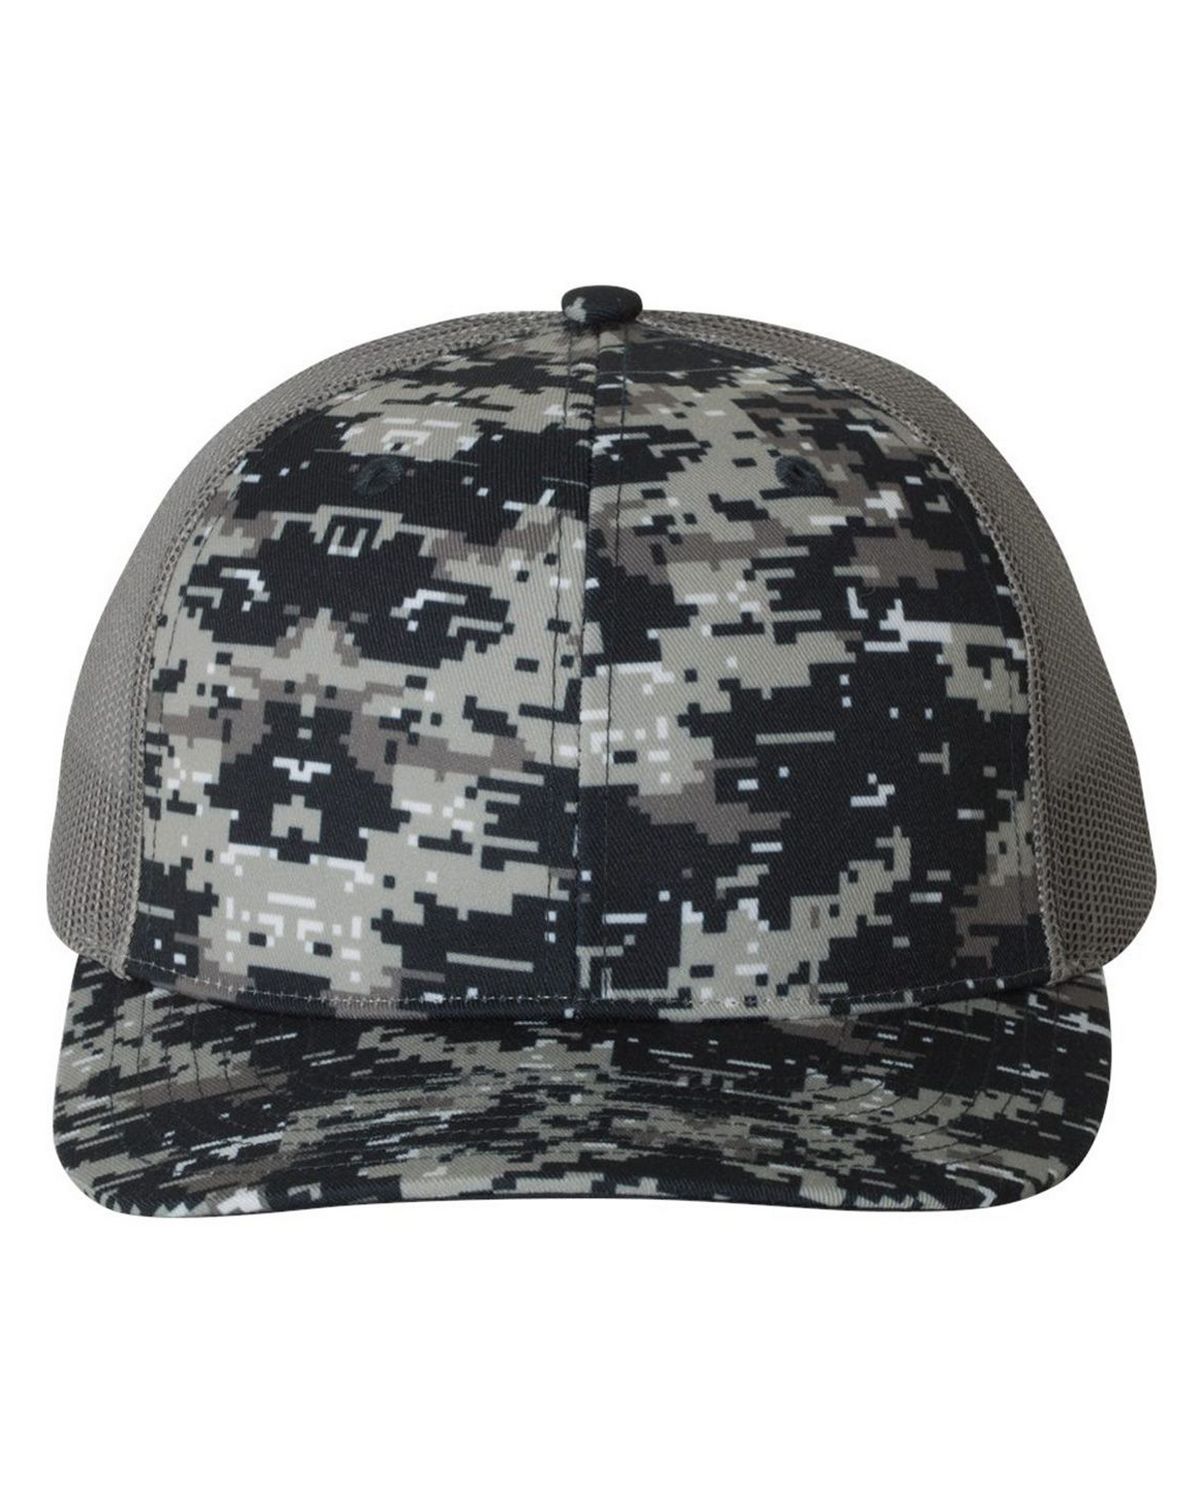 Richardson 112P Patterned Snapback Trucker Cap - Free Shipping Available